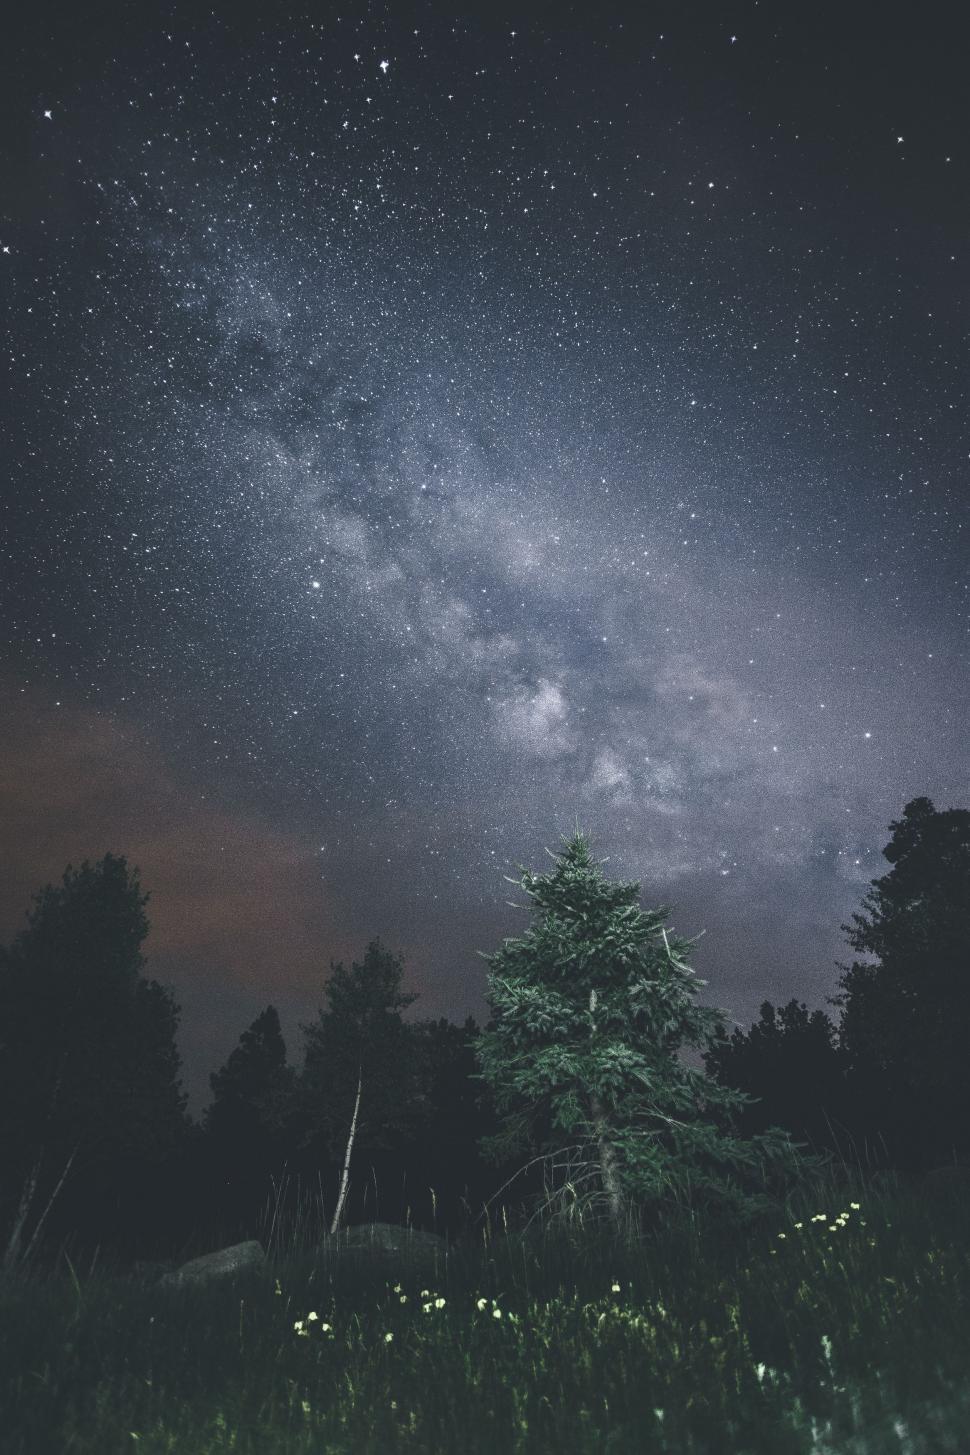 Free Image of Starry Night Sky Over Forest 